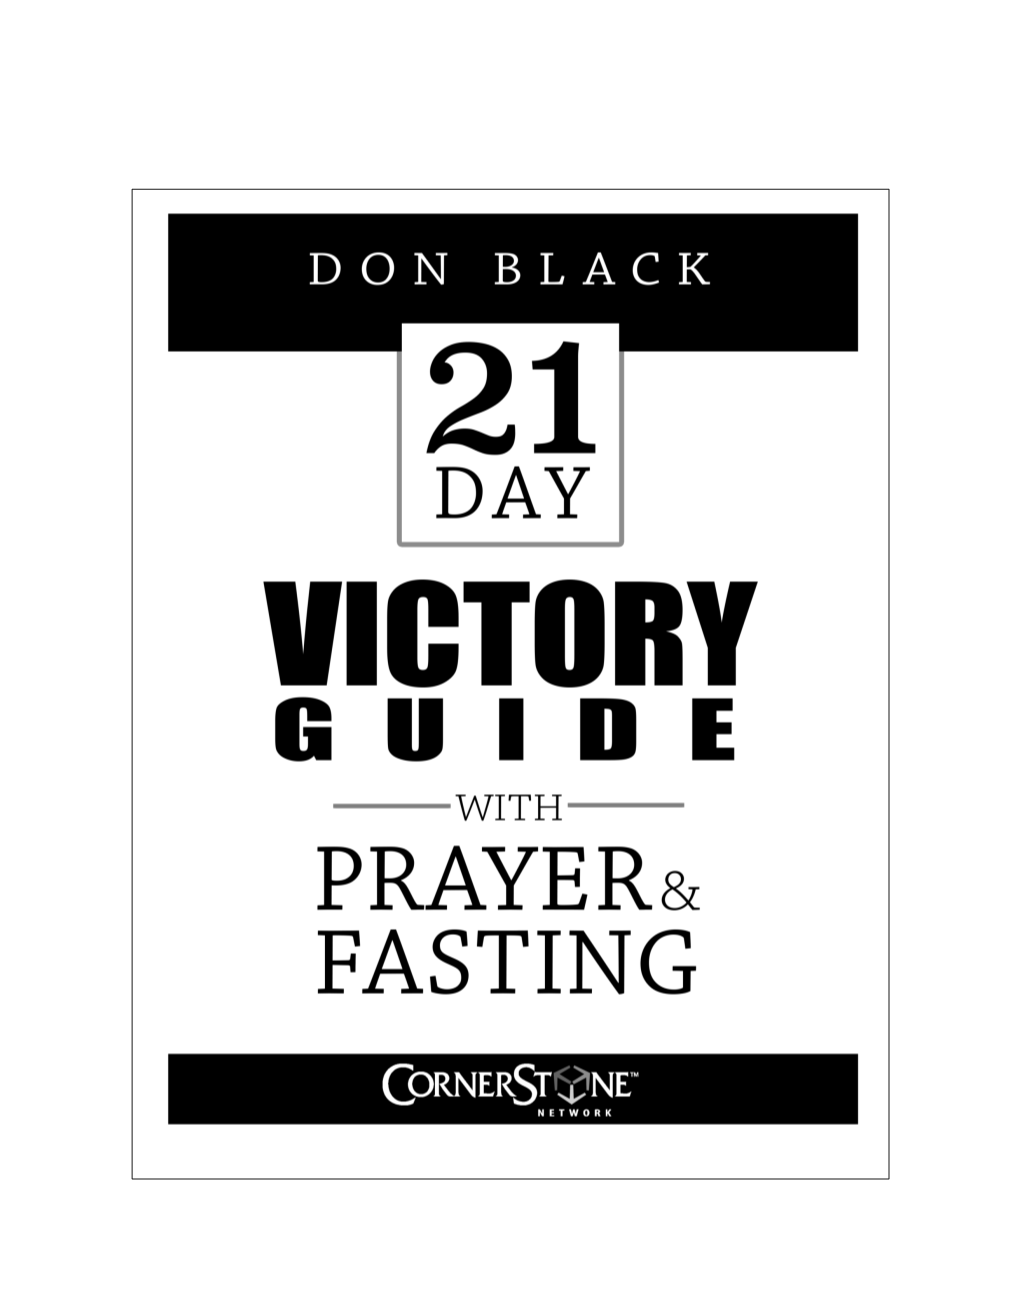 21 DAY VICTORY GUIDE with PRAYER & FASTING Page 1 to Fulﬁll God’S Plan Is Dealing with Unbelief